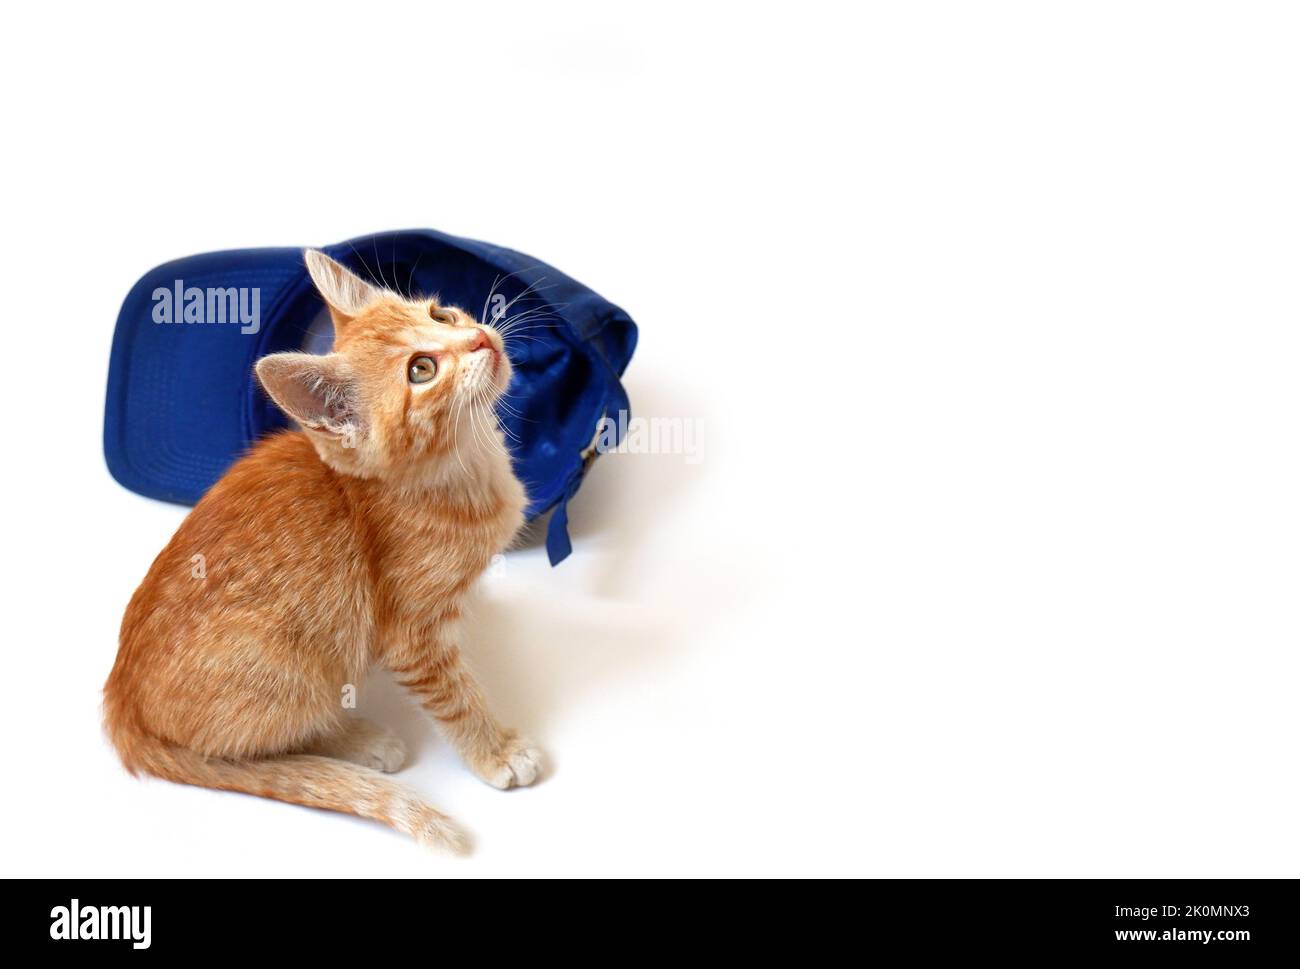 Ginger kitten with a blue baseball cap on a white background. Stock Photo